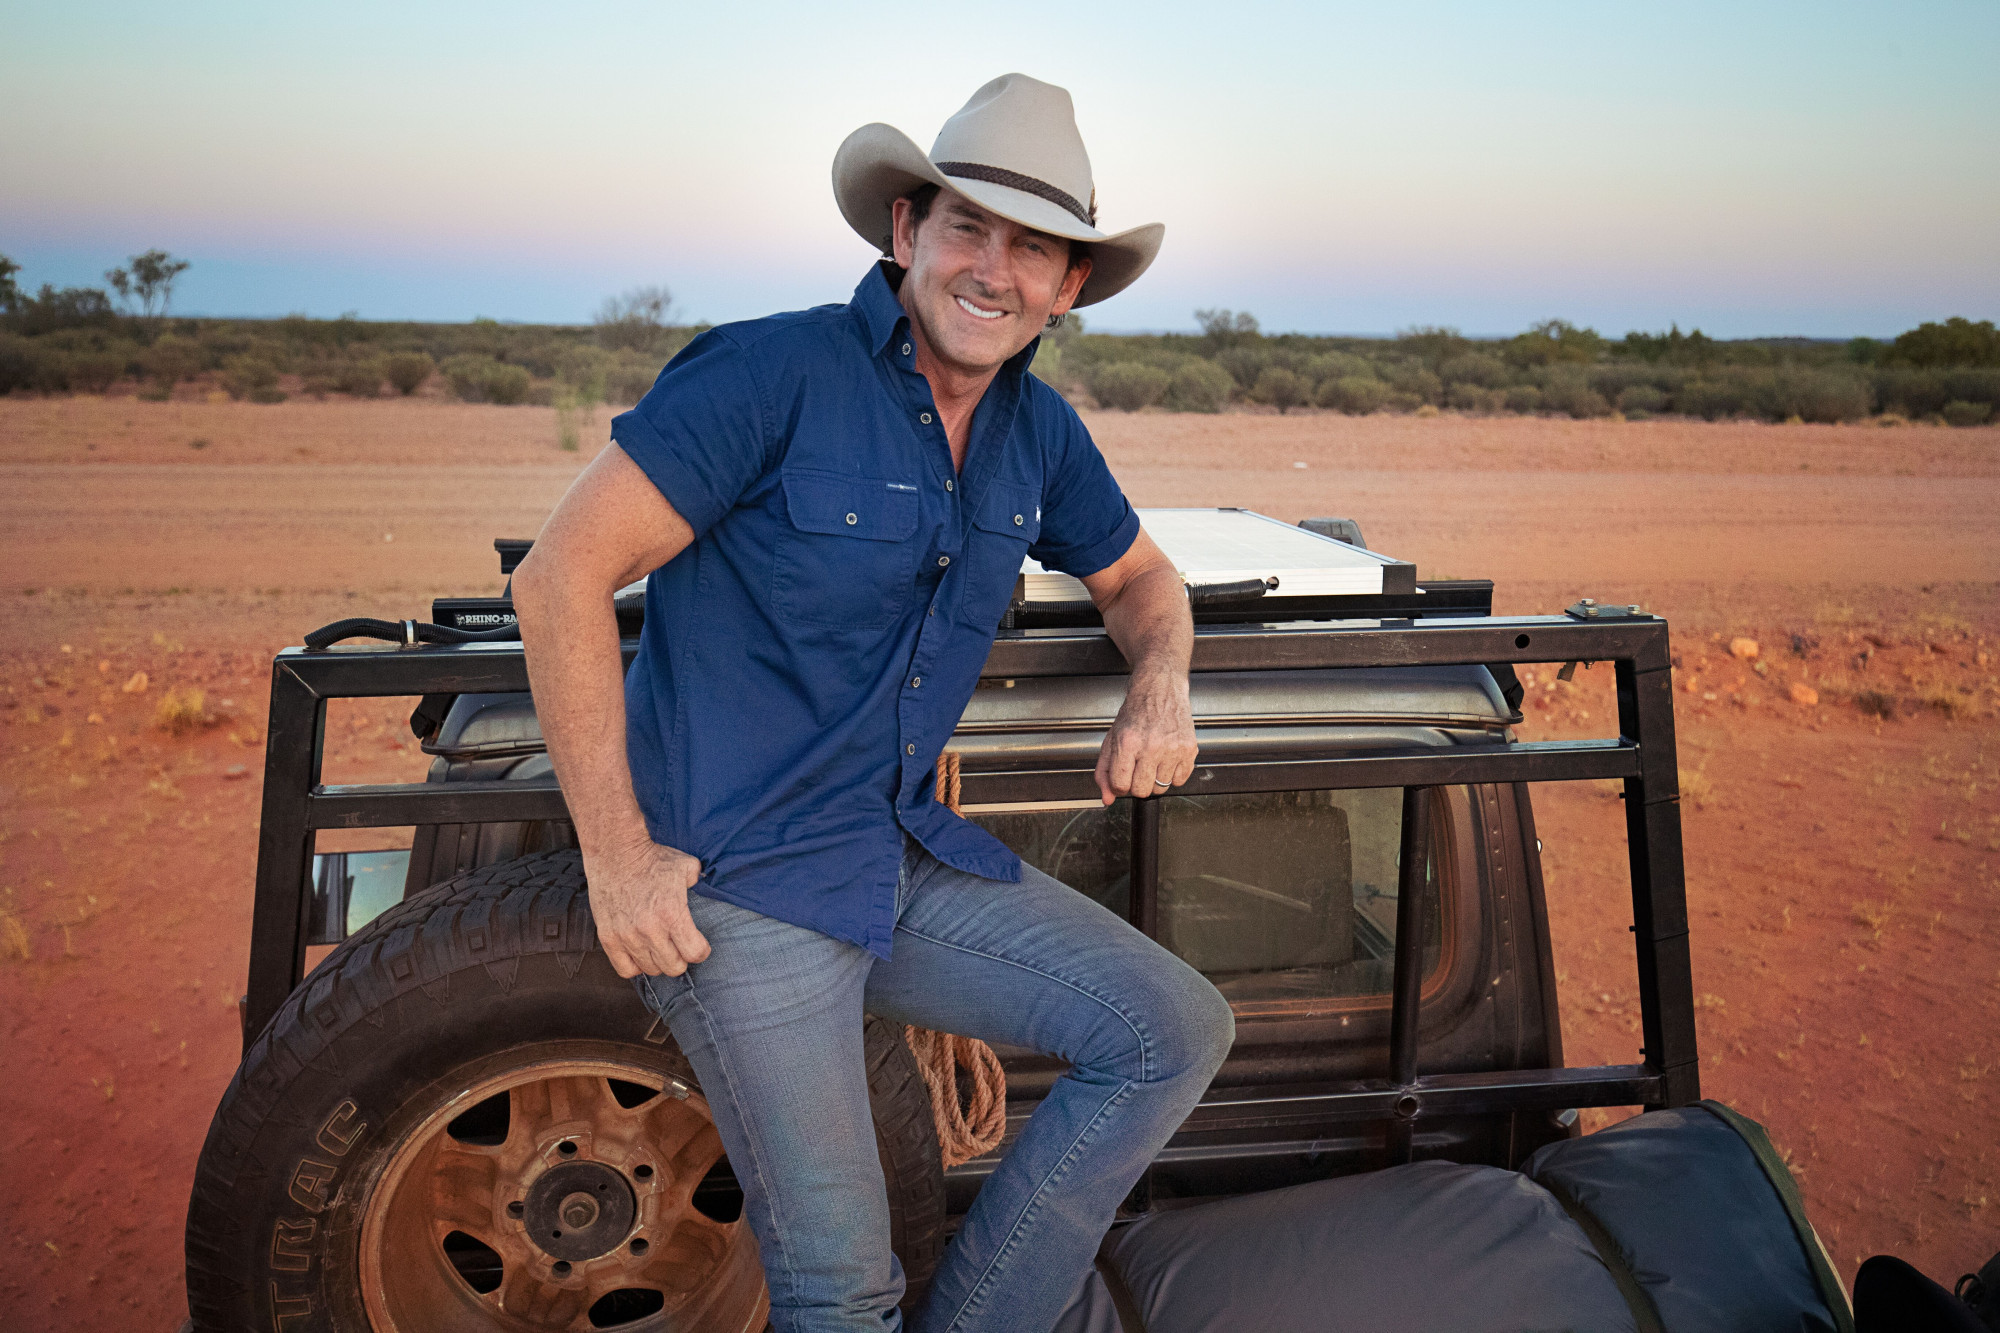 The boy from the bush - Lee Kernaghan is coming to town